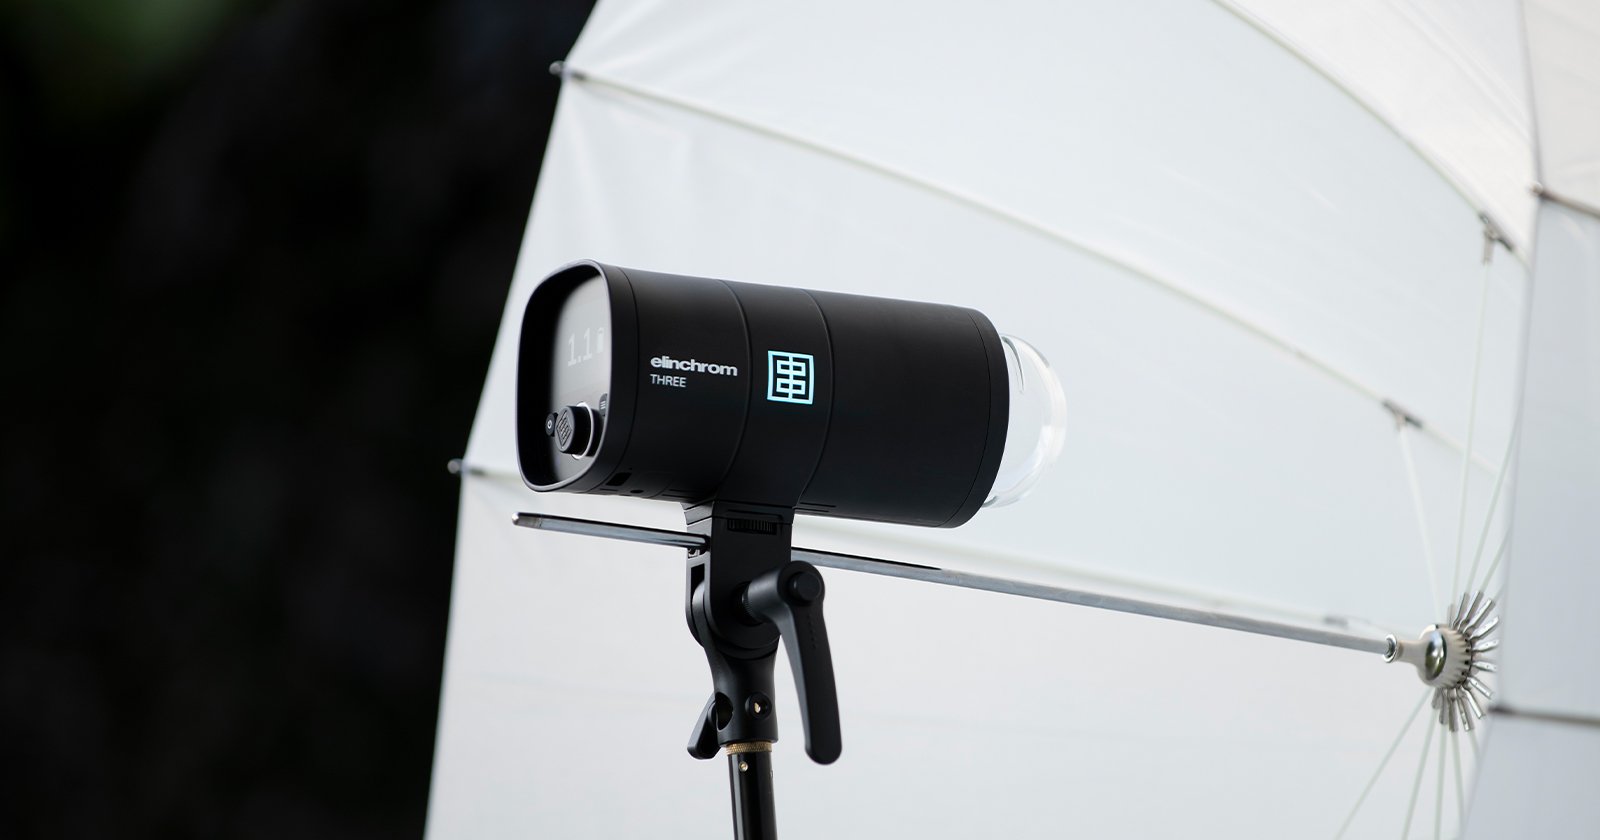 The Elinchrom THREE is a 261Ws Battery-Powered Adventure Light